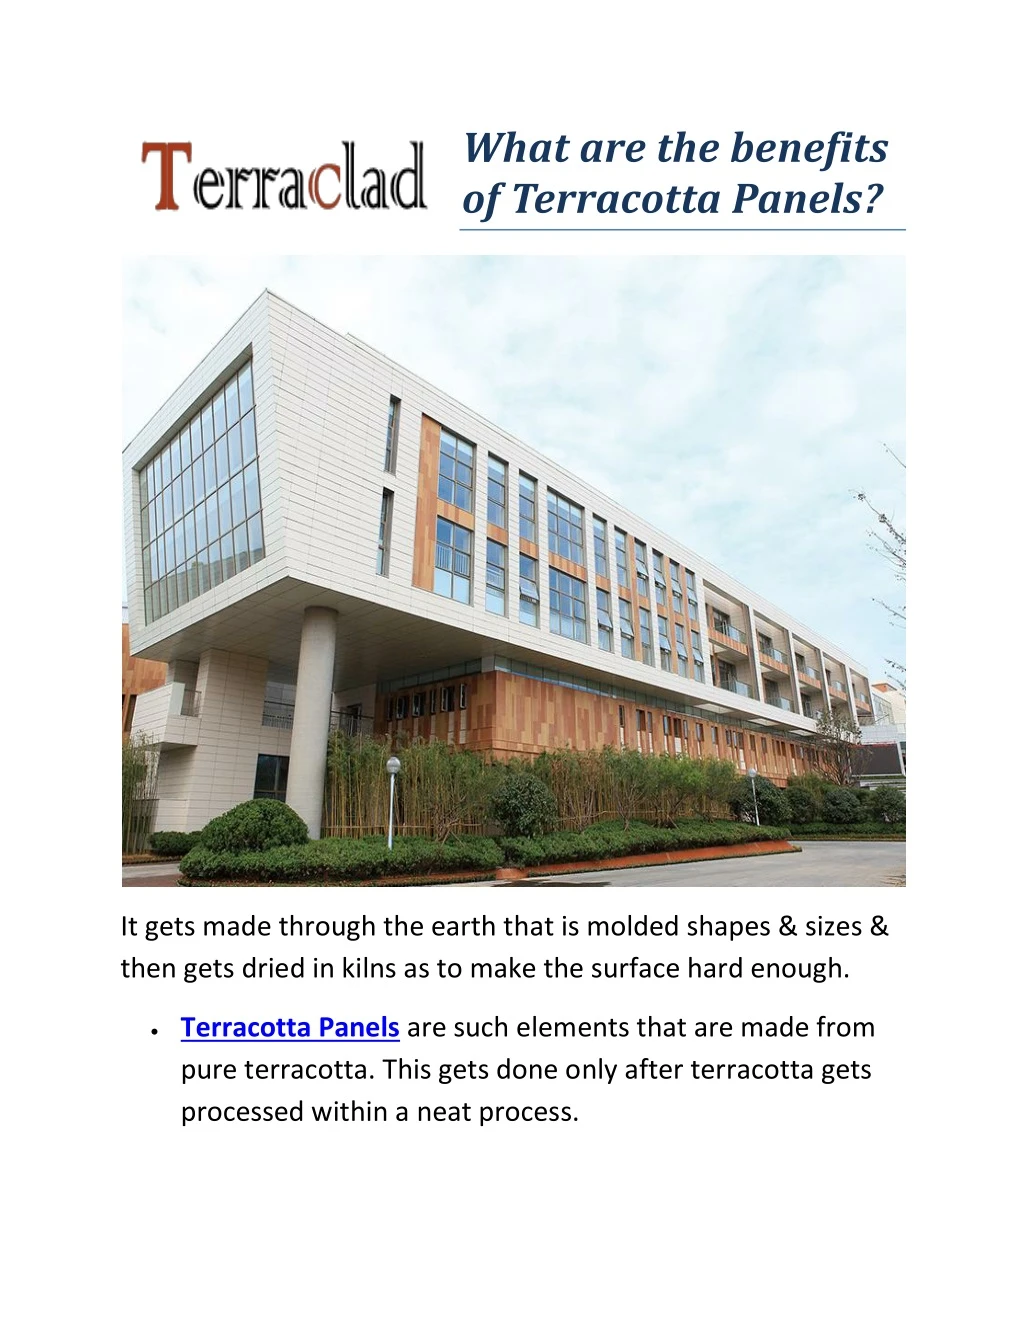 what are the benefits of terracotta panels